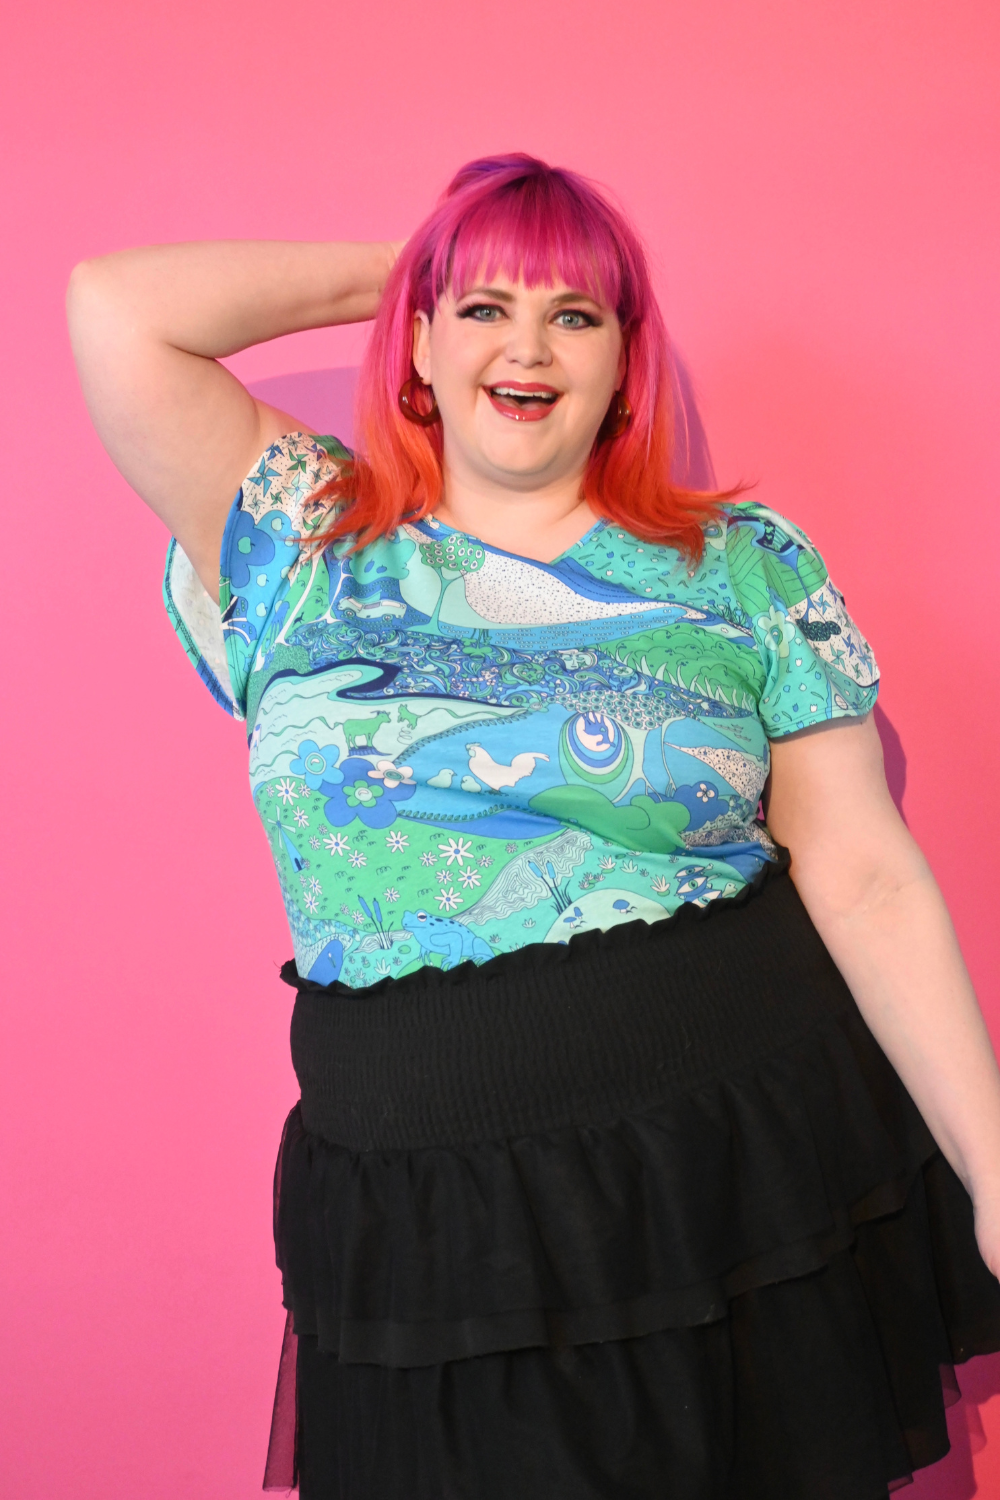 Pink haired model wearing shirt with landscape graphic in green and blue